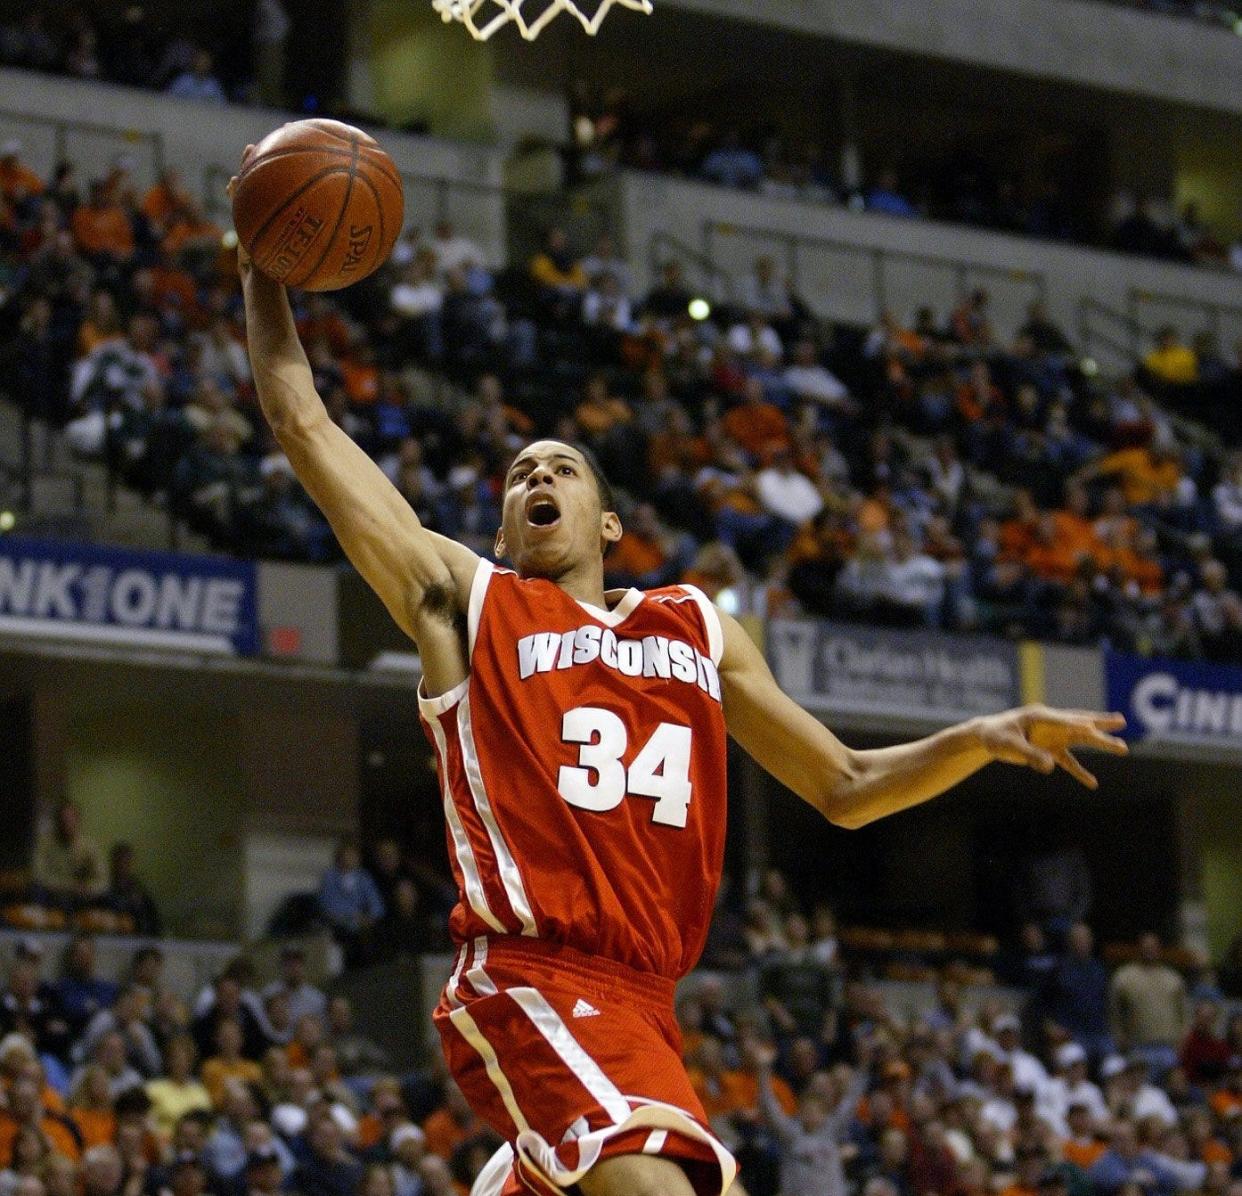 Devin Harris was the 2004 Big Ten player of the year and helped lead the Badgers to three conference championships (2002 and '03 regular season, and 2004 Big Ten Tournament).